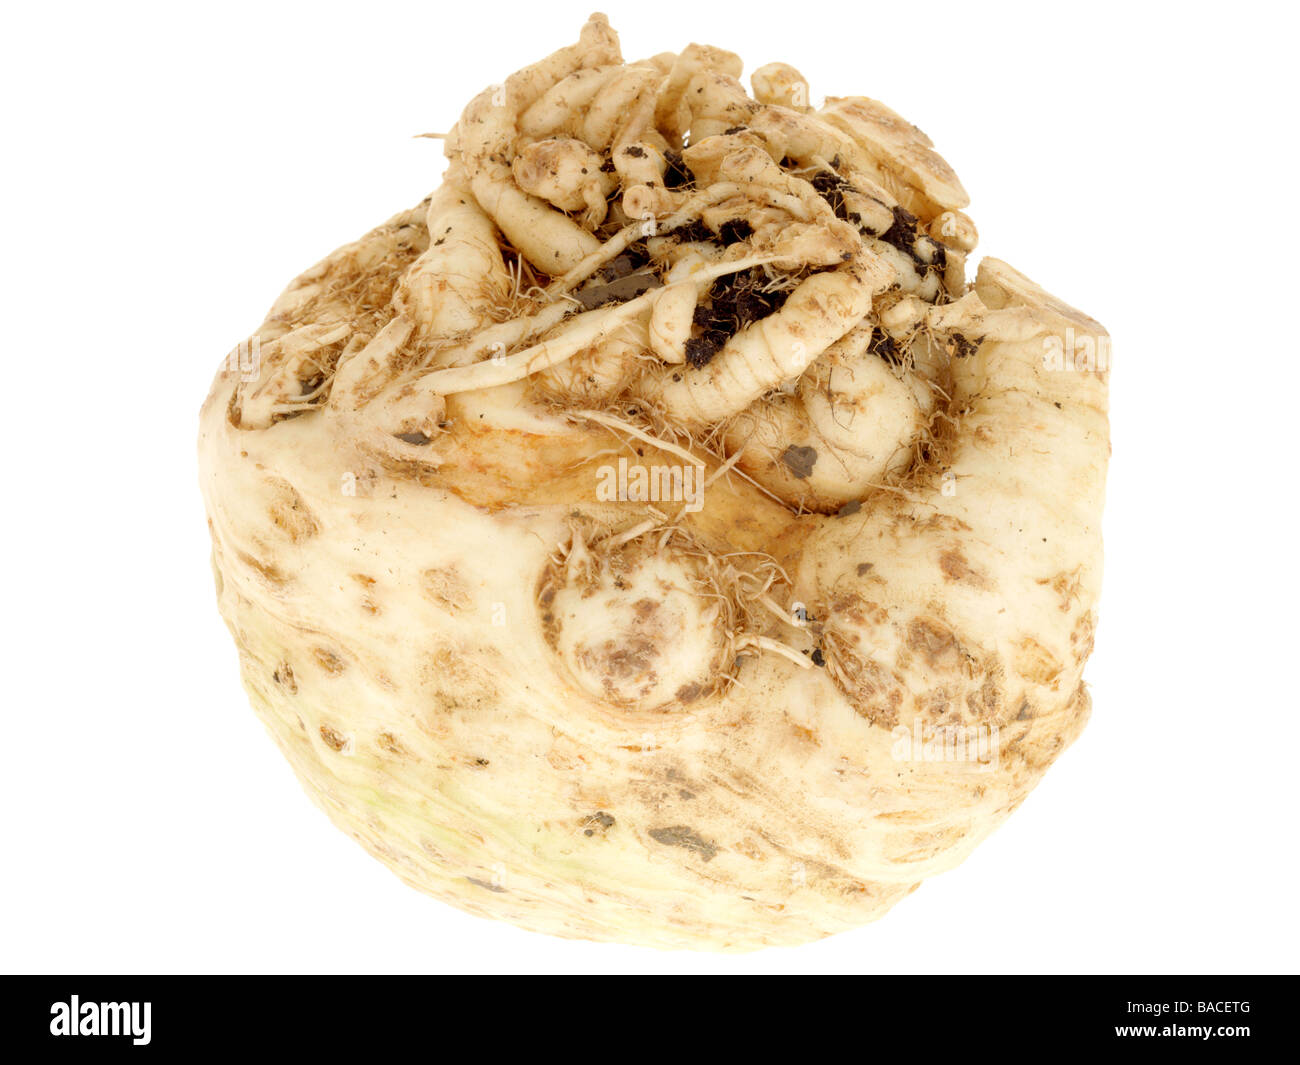 Fresh Healthy Celeriac Aromatic Vegetable Isolated Against A White Background With No people And A Clipping Path Stock Photo